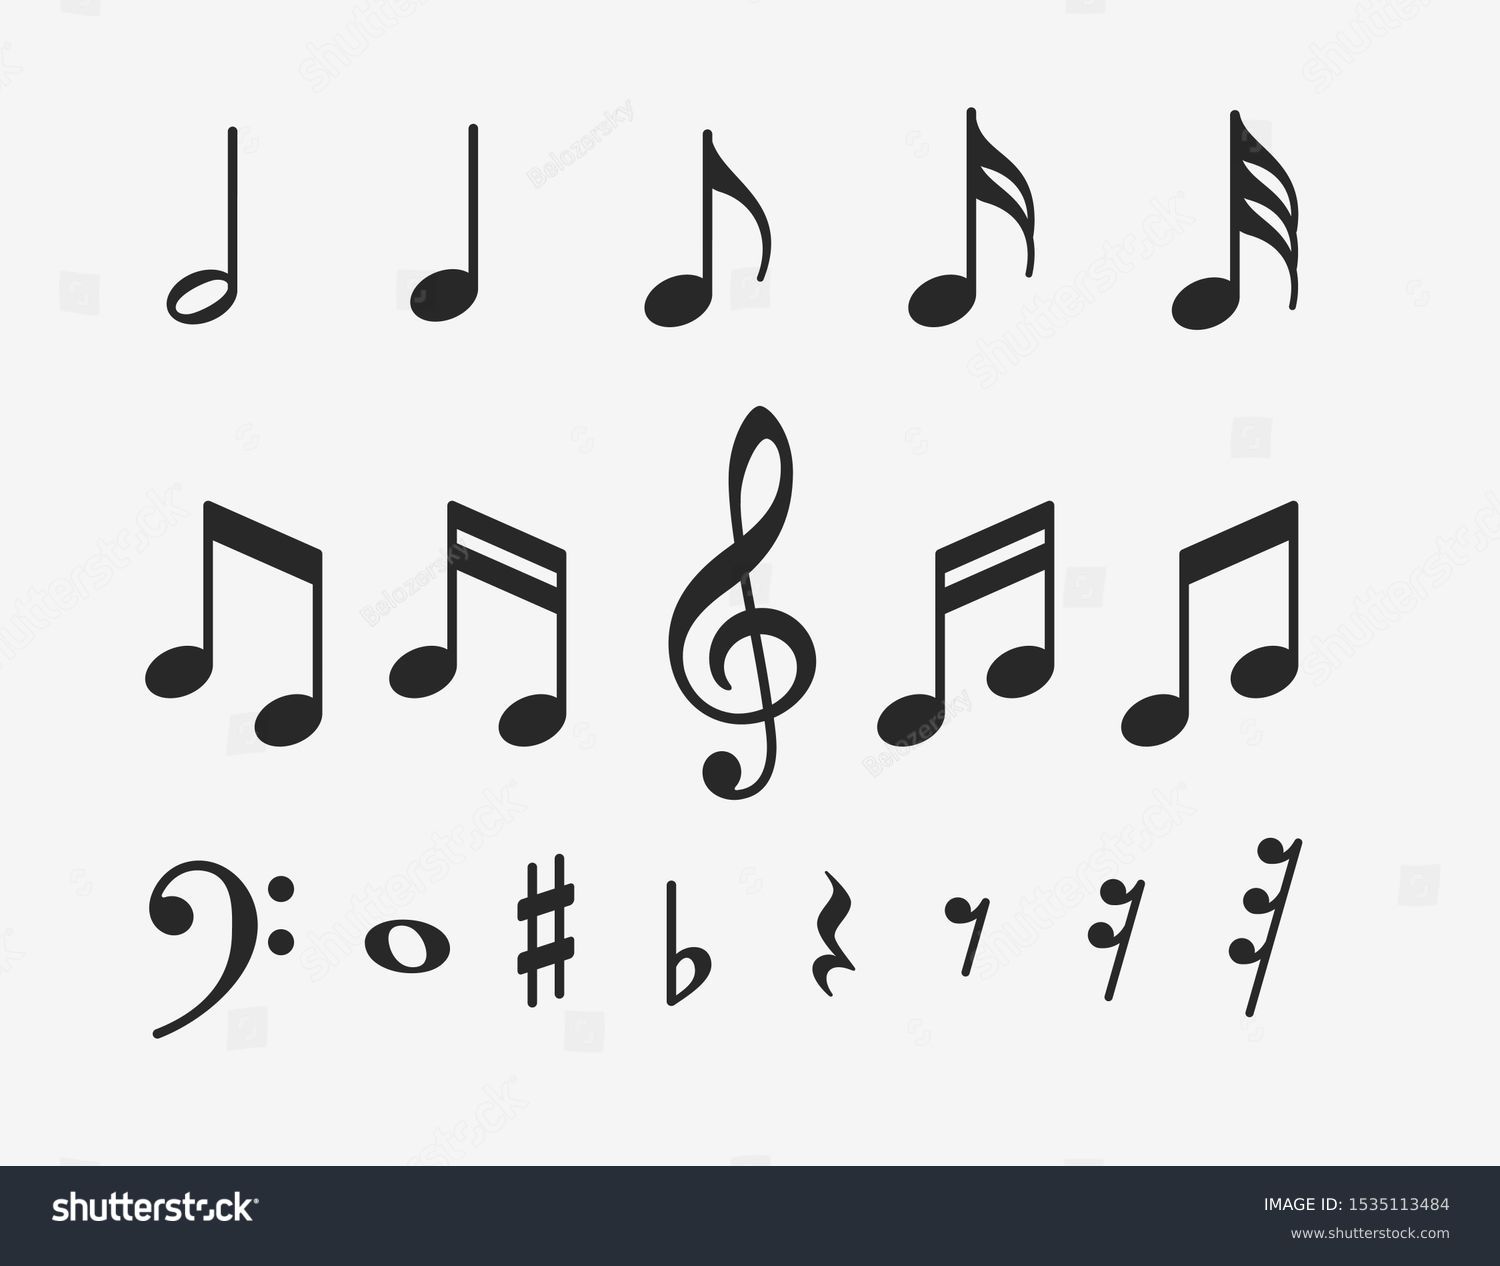 Music notes icons set. Musical key signs. Vector symbols on white background. #1535113484